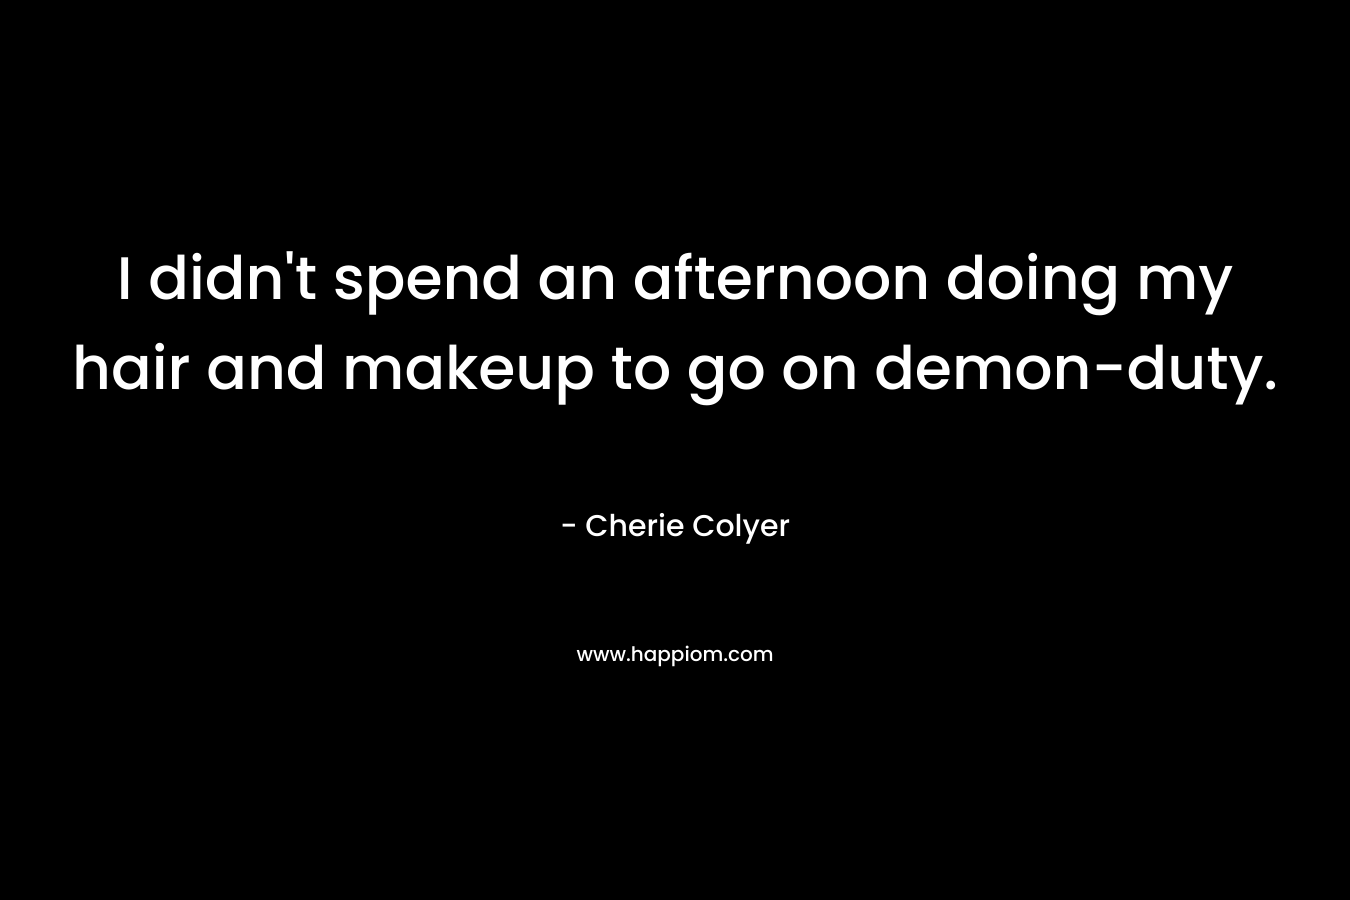 I didn’t spend an afternoon doing my hair and makeup to go on demon-duty. – Cherie Colyer